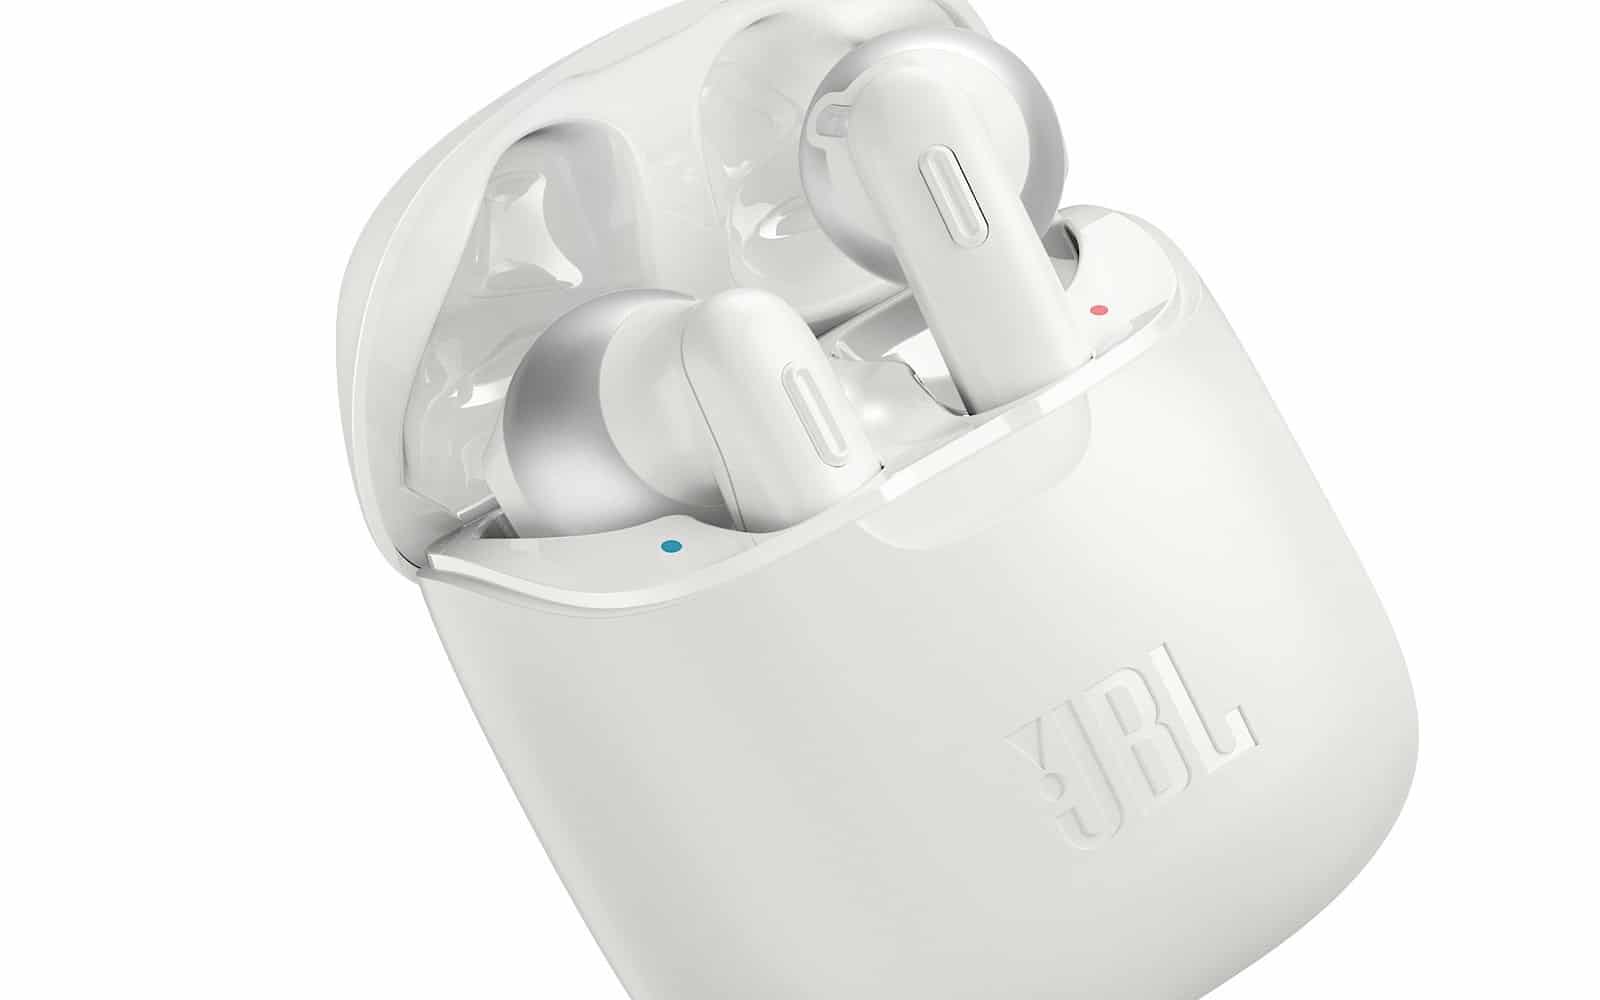 Idol Inspektion Hemmelighed JBL takes on AirPods with bassy Tune 220 – Pickr